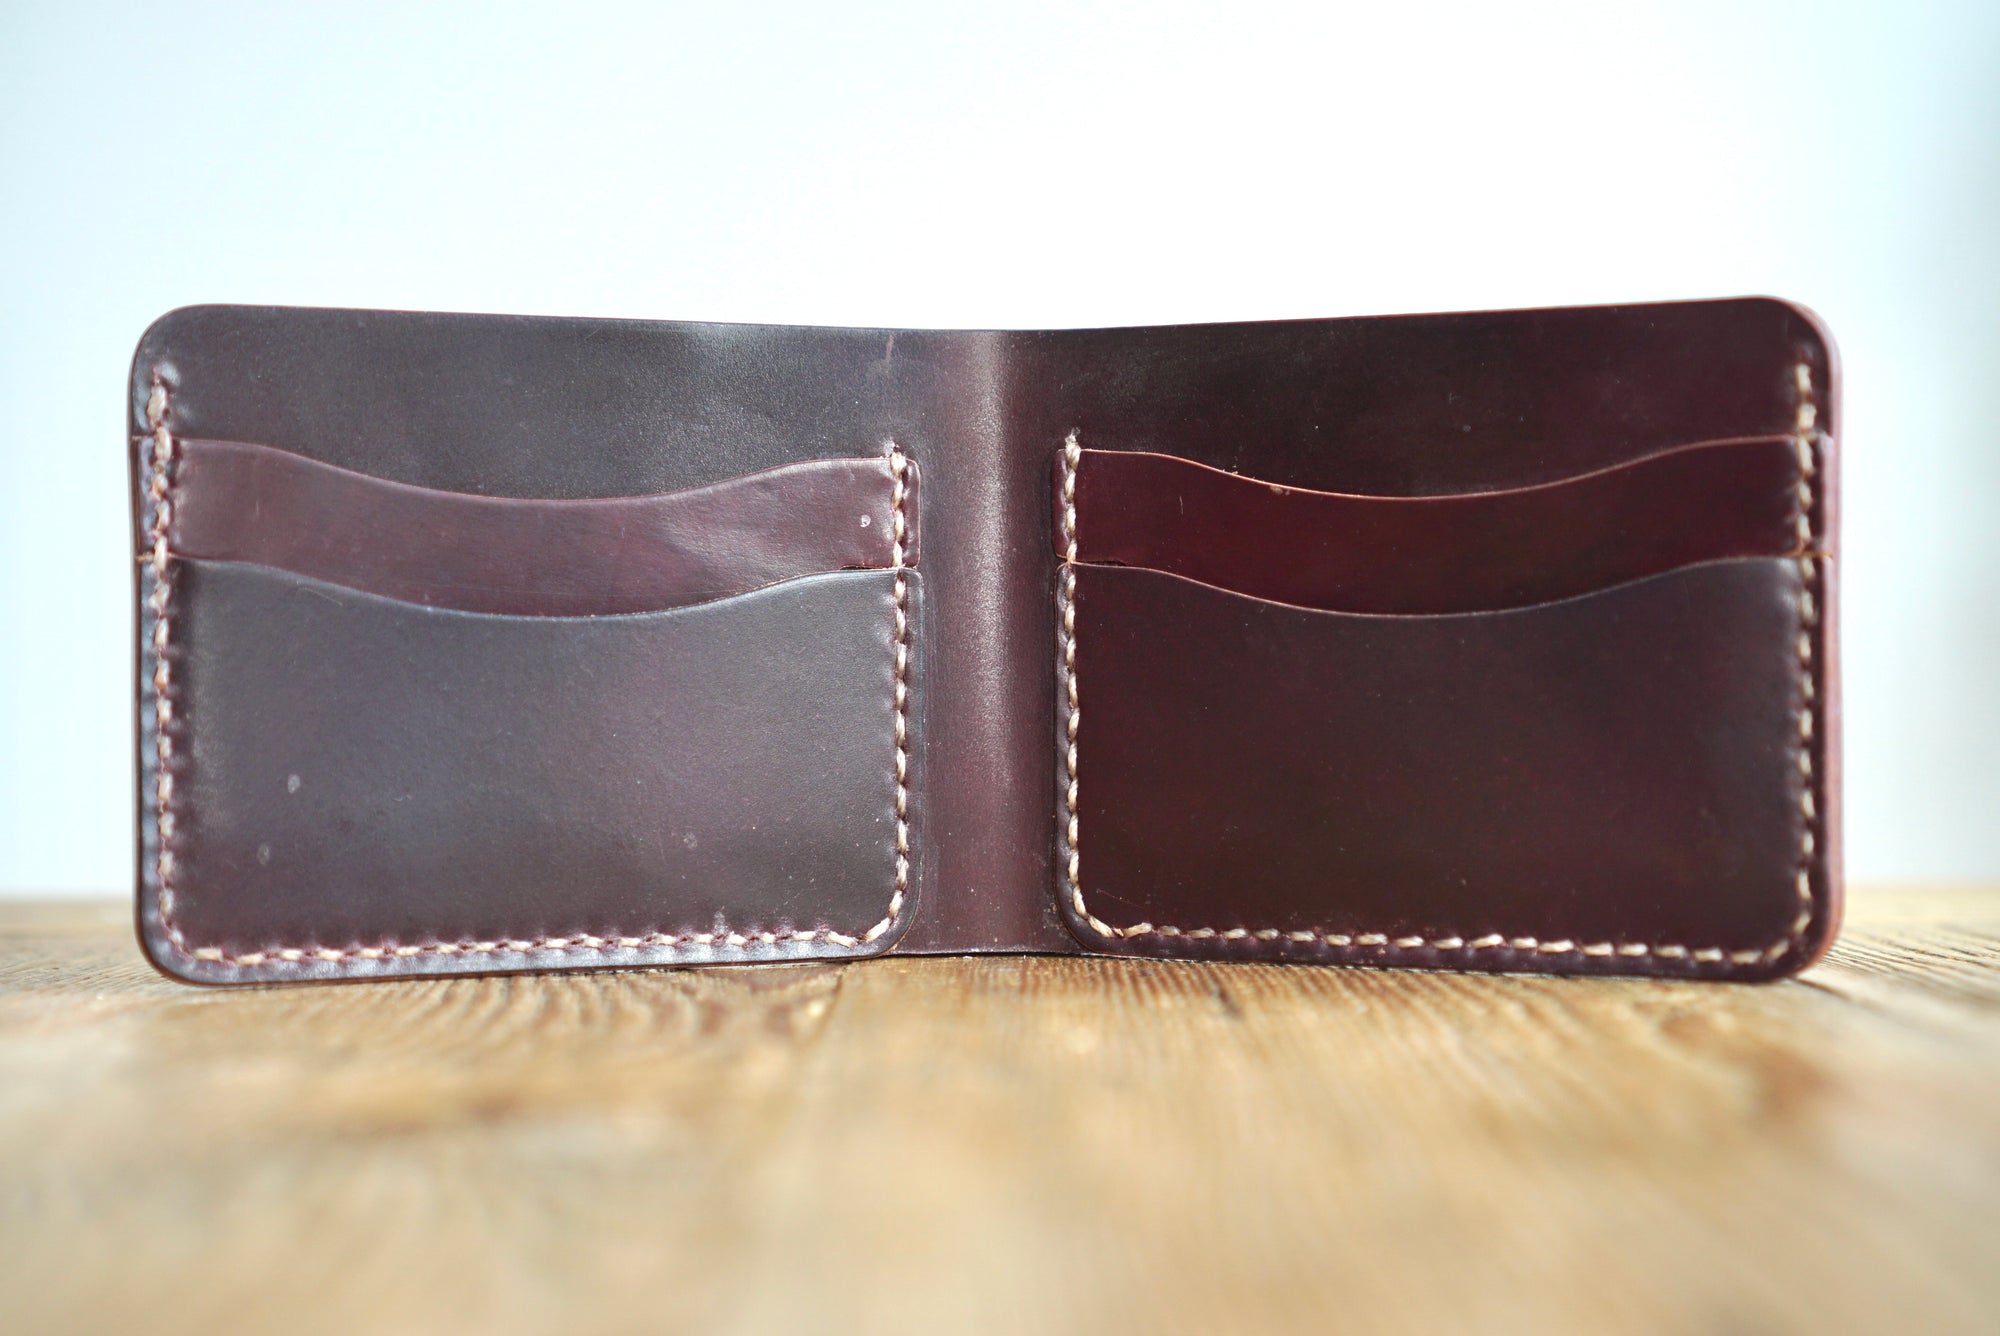 Bulwark Bifold - Horween Bourbon and Color 8 Shell Cordovan